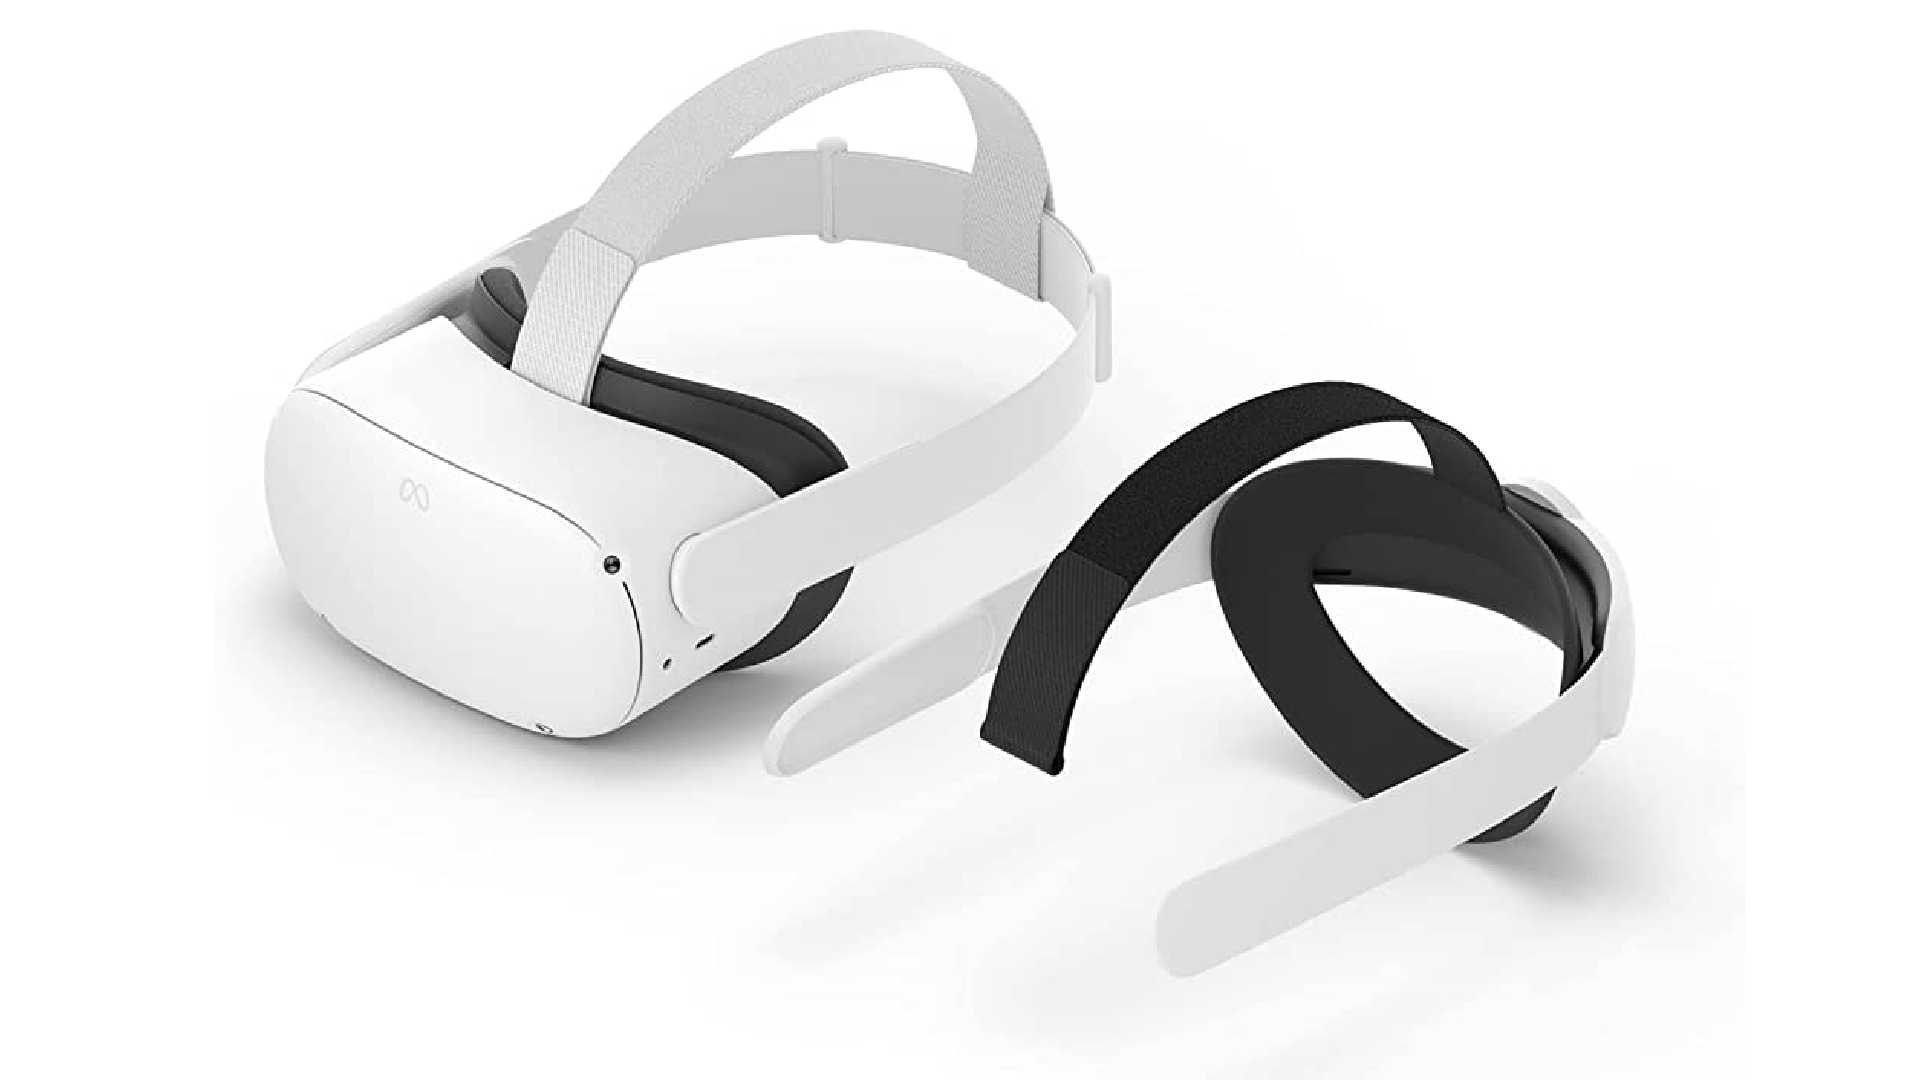 The Meta Quest 2 headset next to a plastic Elite Strap